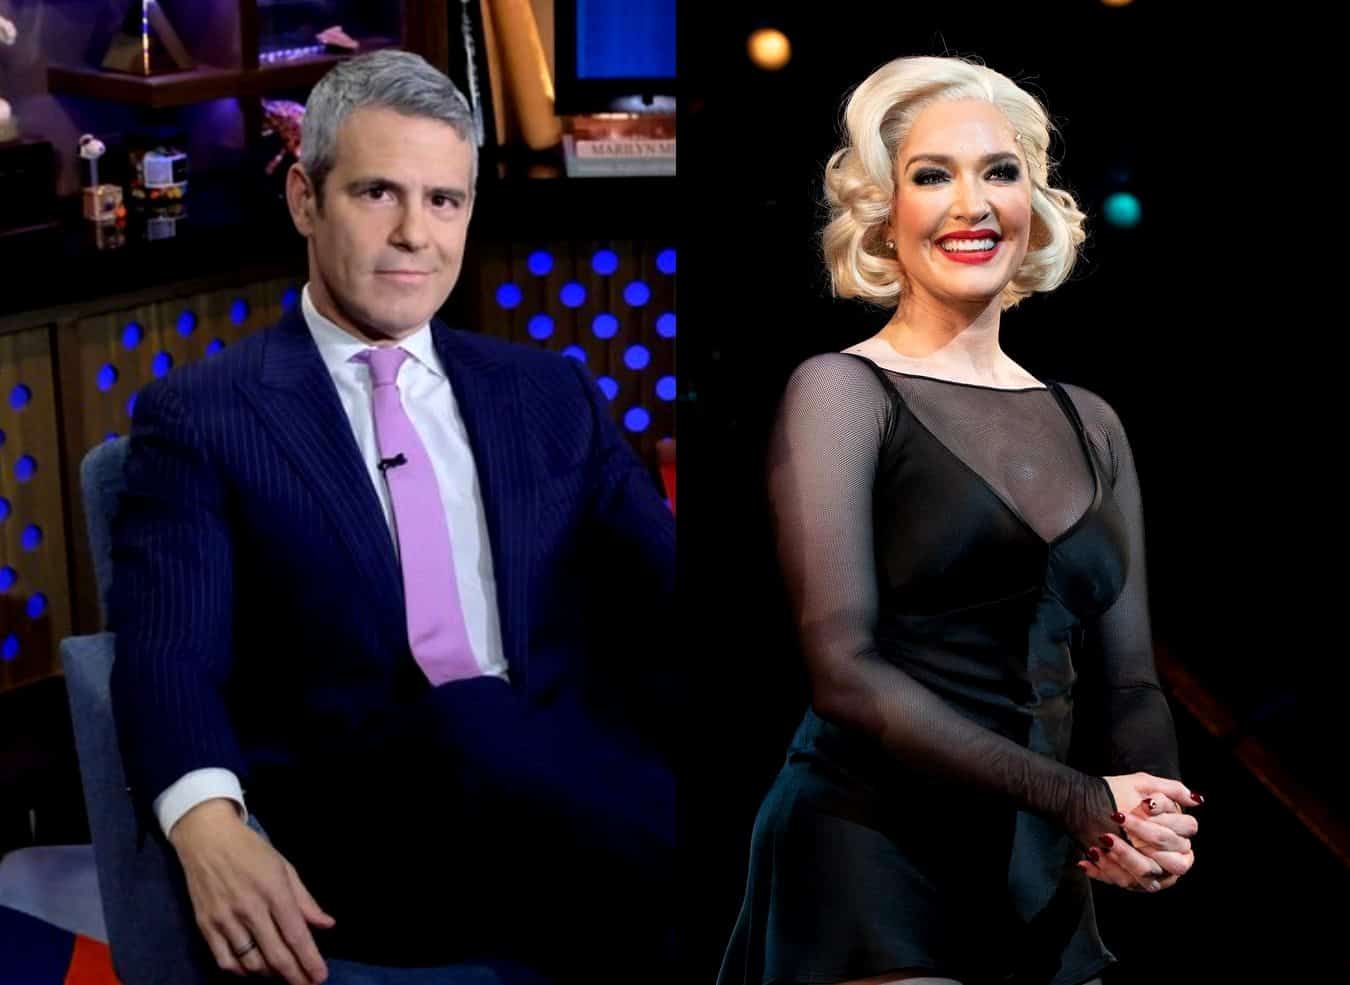 Andy Cohen's WWHL Show is Suspended and Erika Jayne is Forced to End Broadway Run Due to Coronavirus Concerns, Plus How Other Bravo Stars Are Dealing With Outbreak